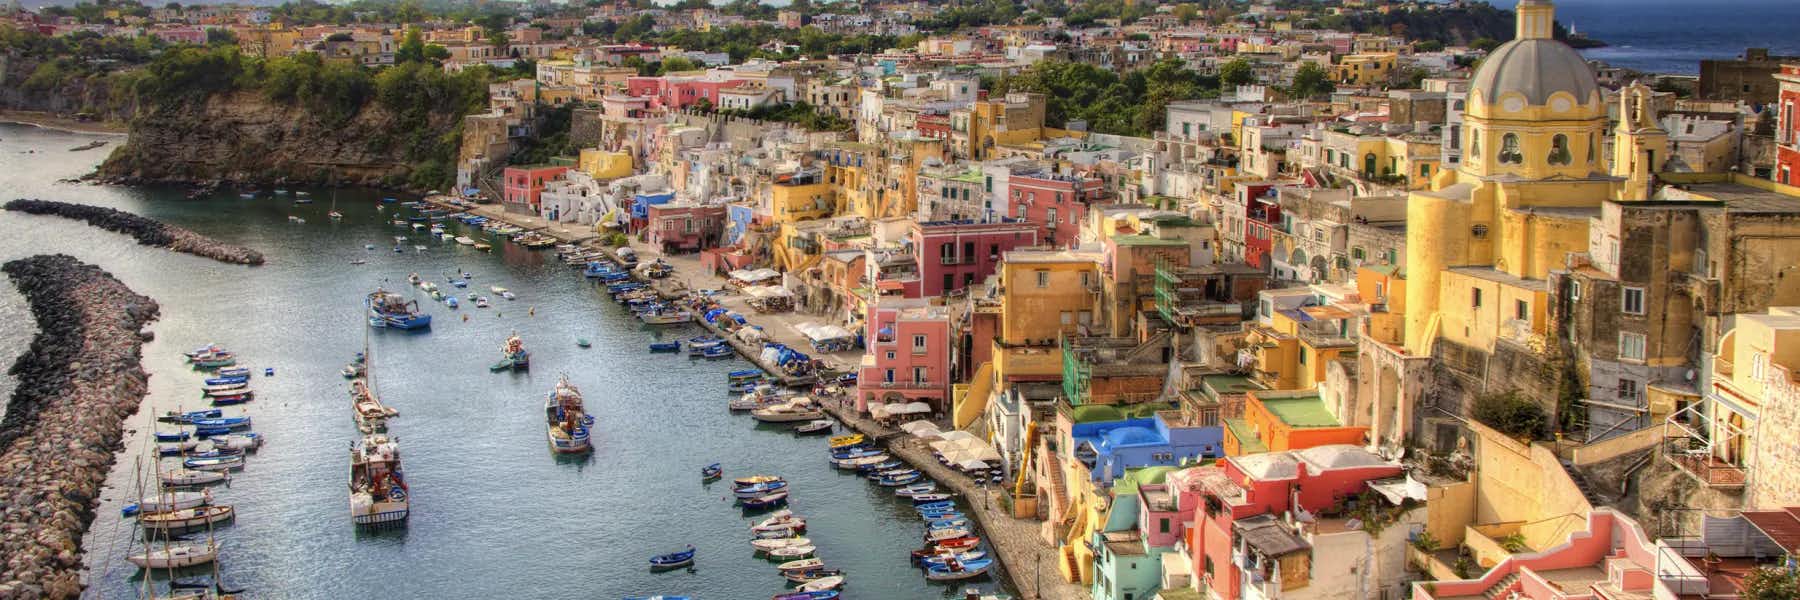 Amazing Things To Do and See in Unforgettable Naples, Italy